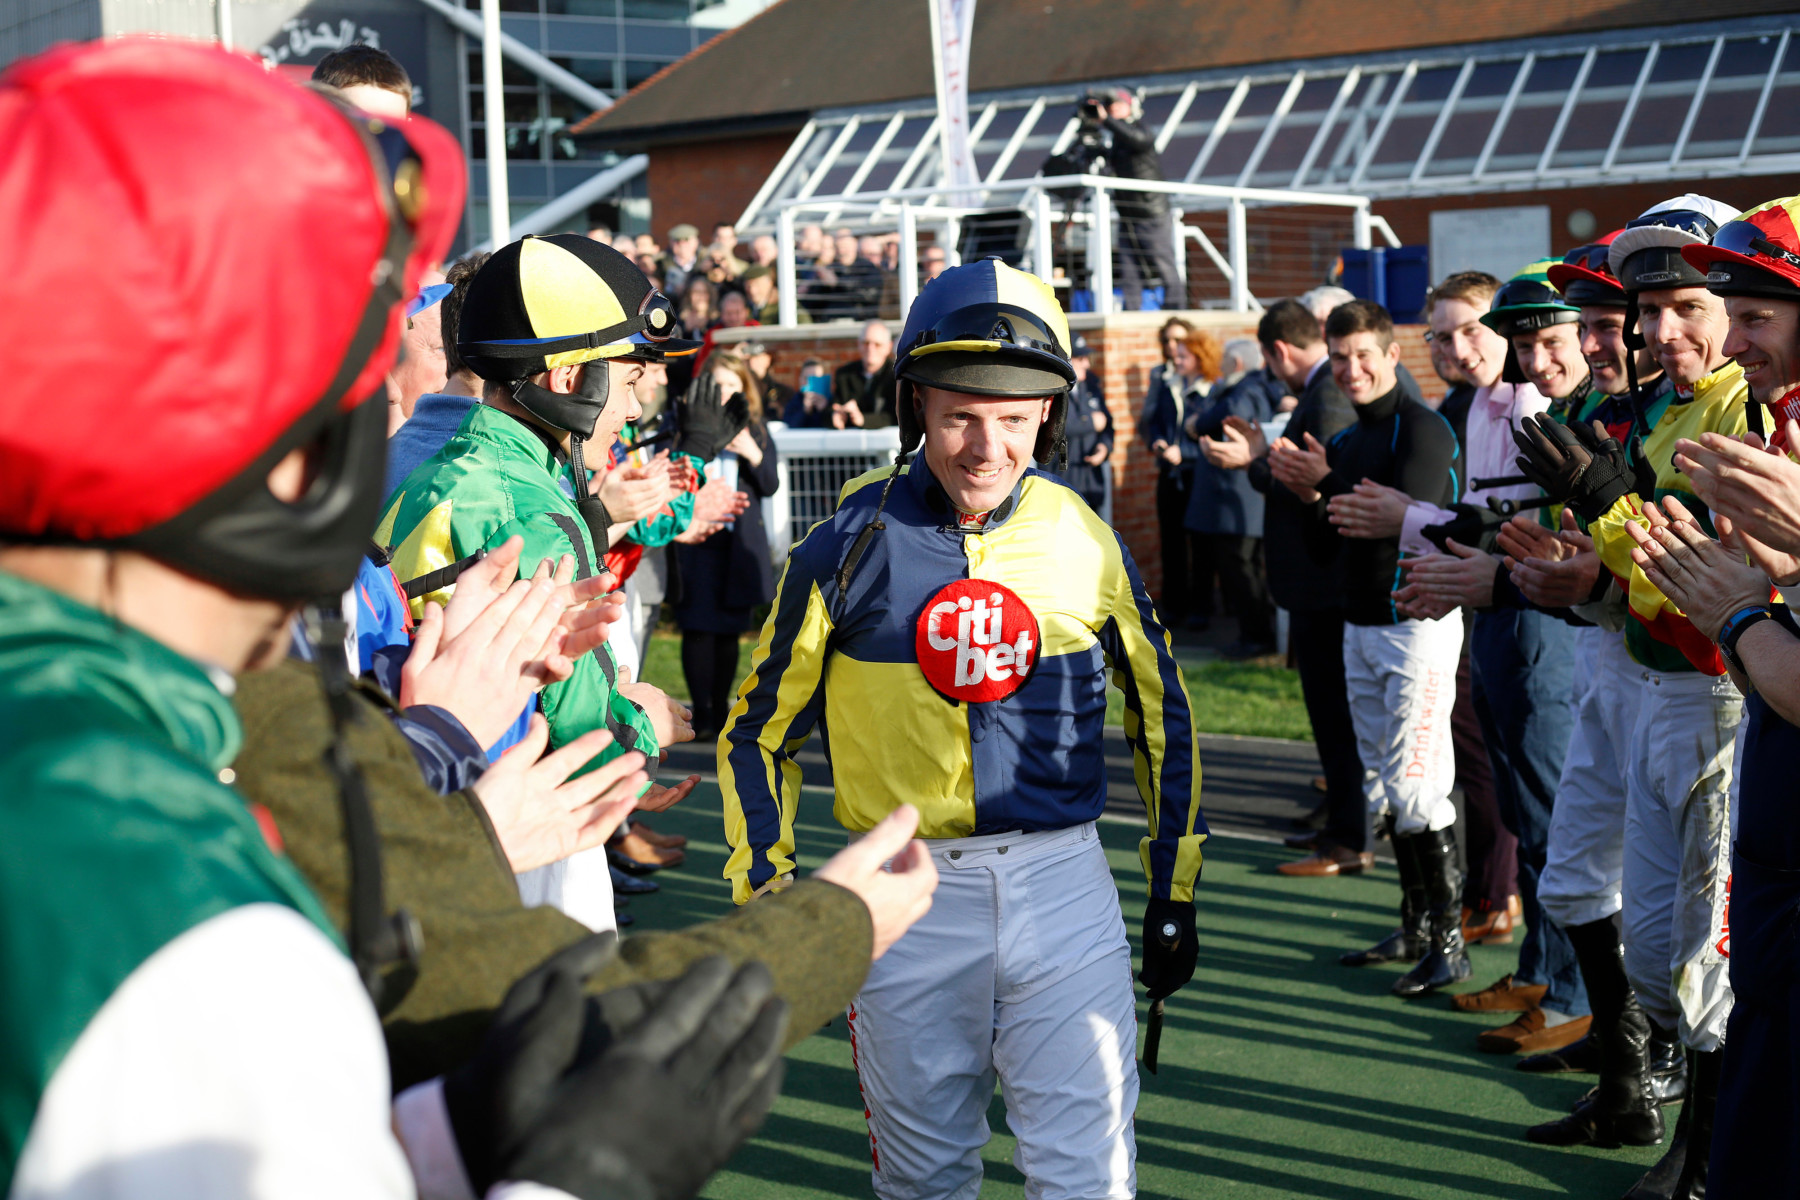 Fehily was given a guard of honour before his last ever ride